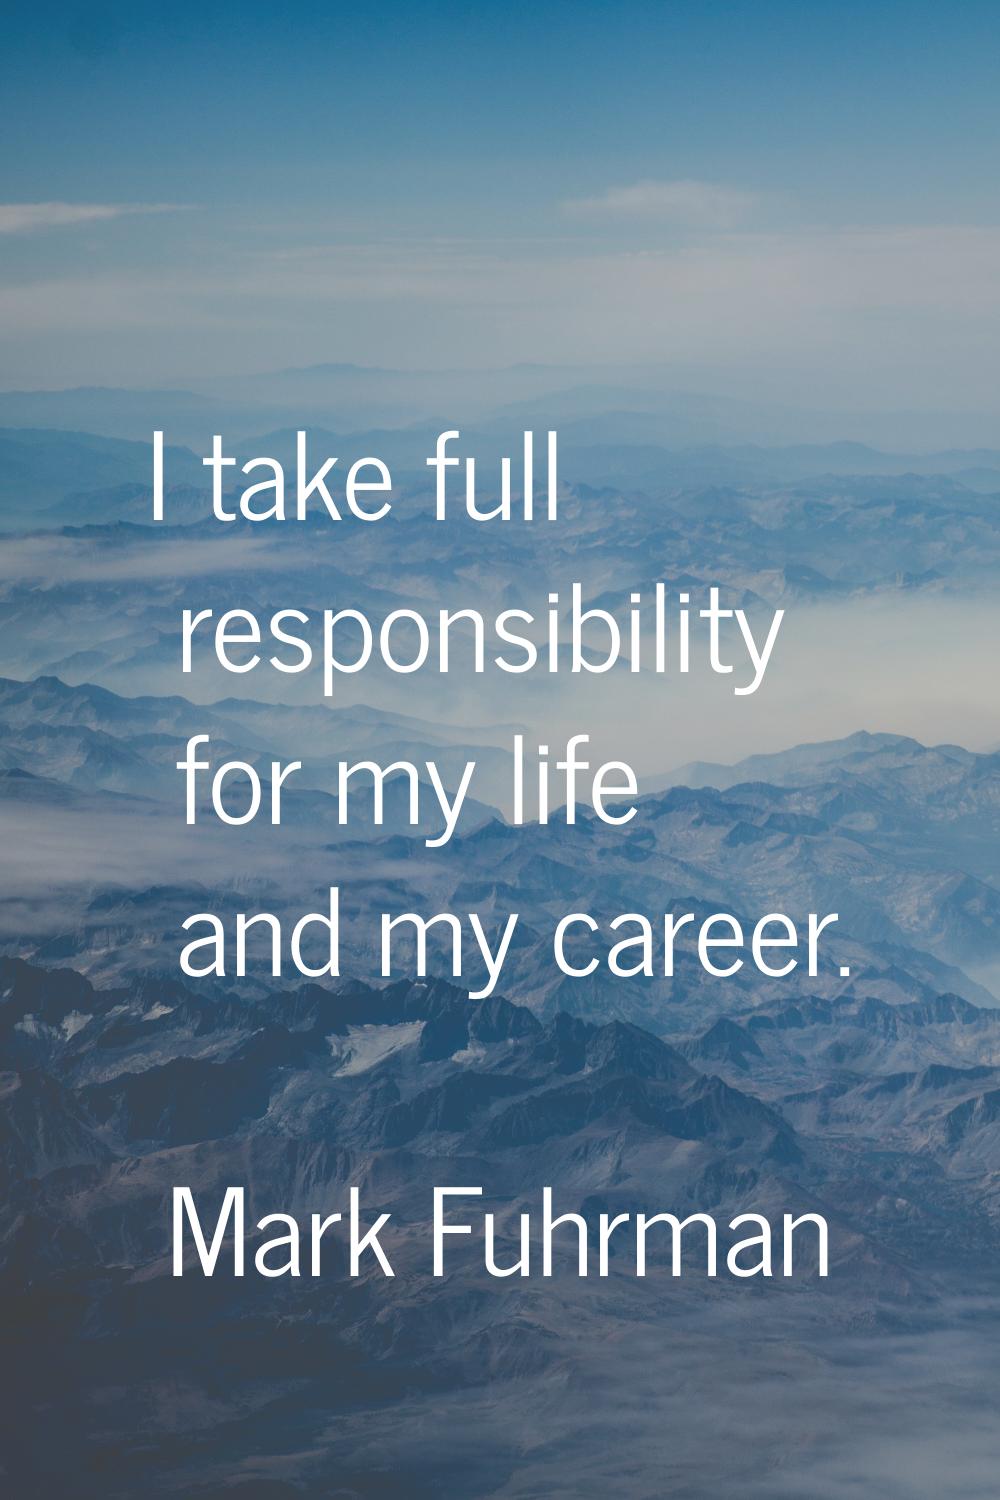 I take full responsibility for my life and my career.